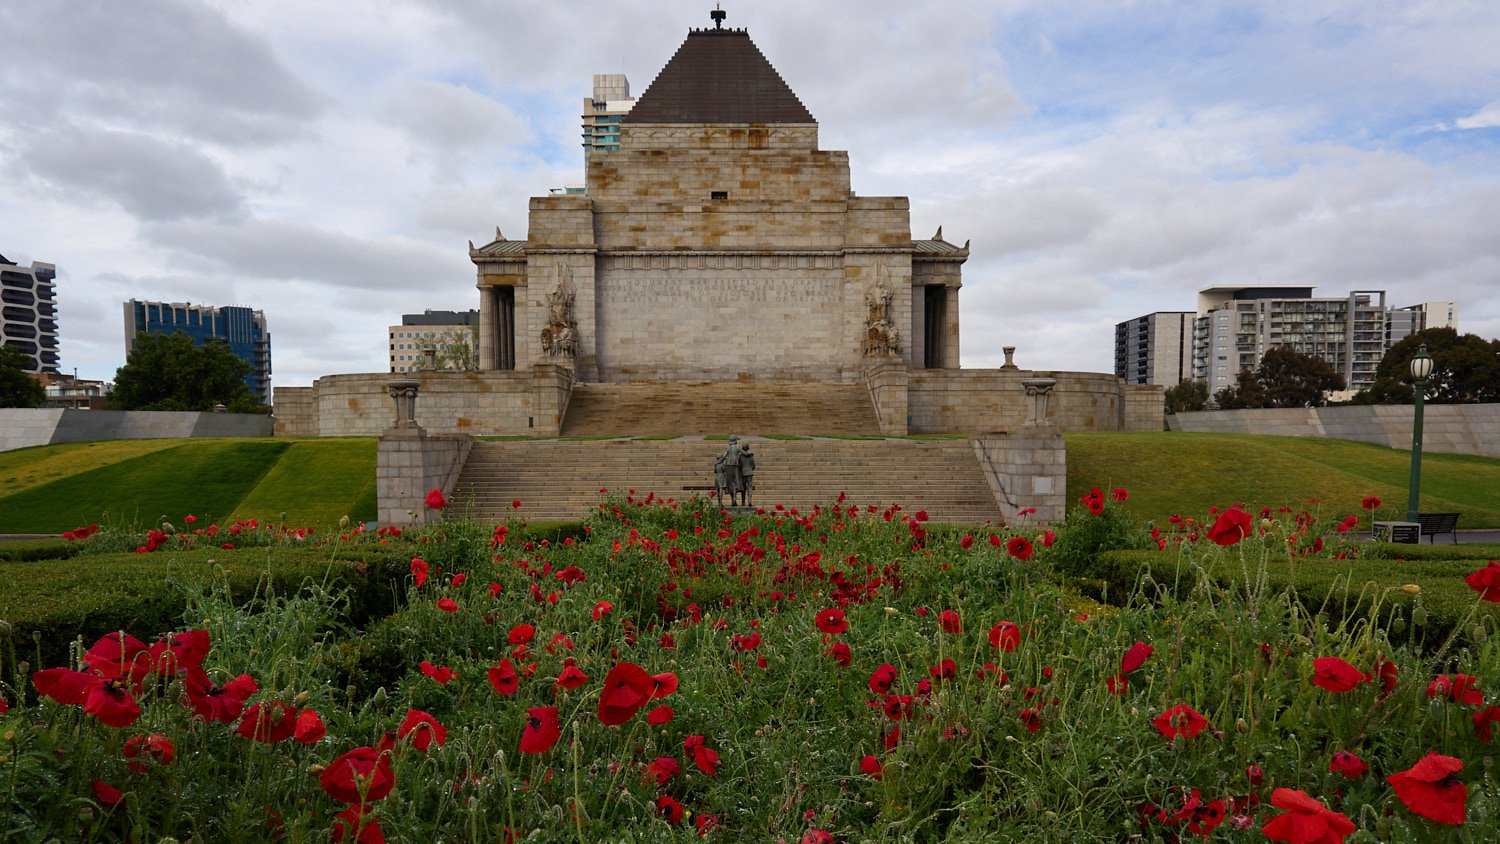 The Shrine of Remembrance Melbourne